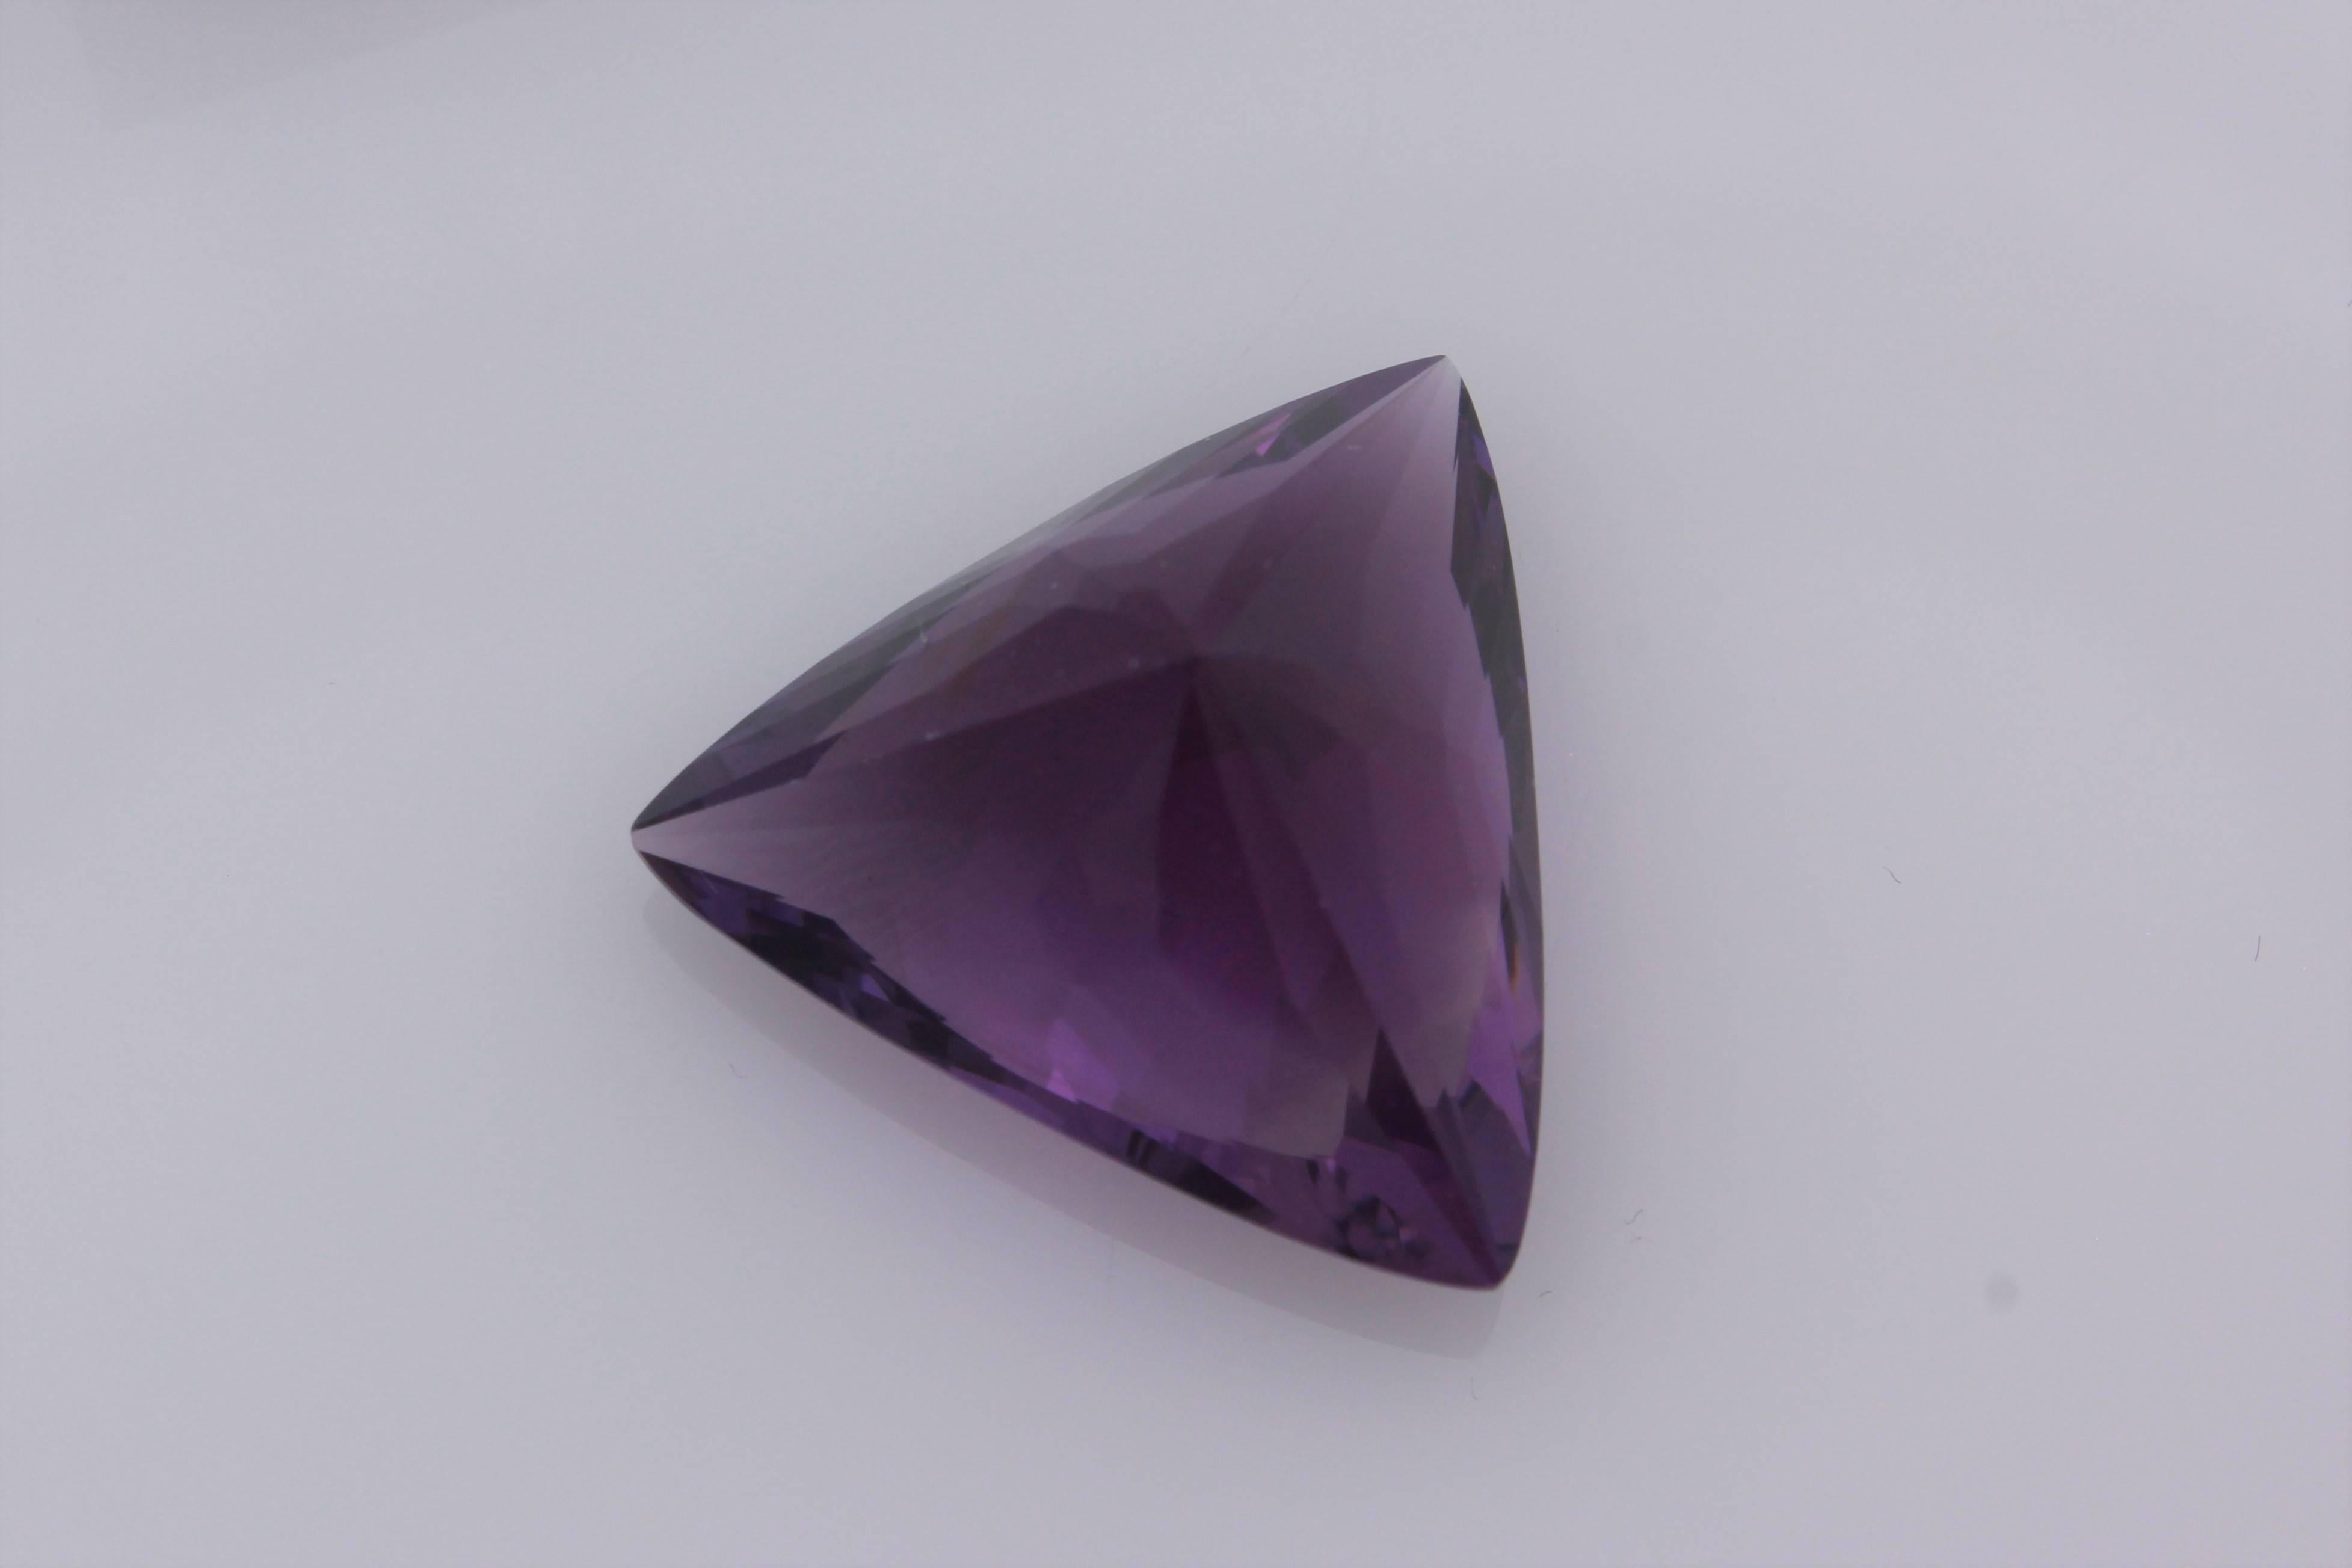 20.17 carat Triangular Shaped Amethyst.  This Amethyst has a deep, rich, royal, purple color and is Pantene's color of the year!  It is excellently cut with tremendous polish and symmetry to bring out the beautiful coloring!  It measures 19.6 mm